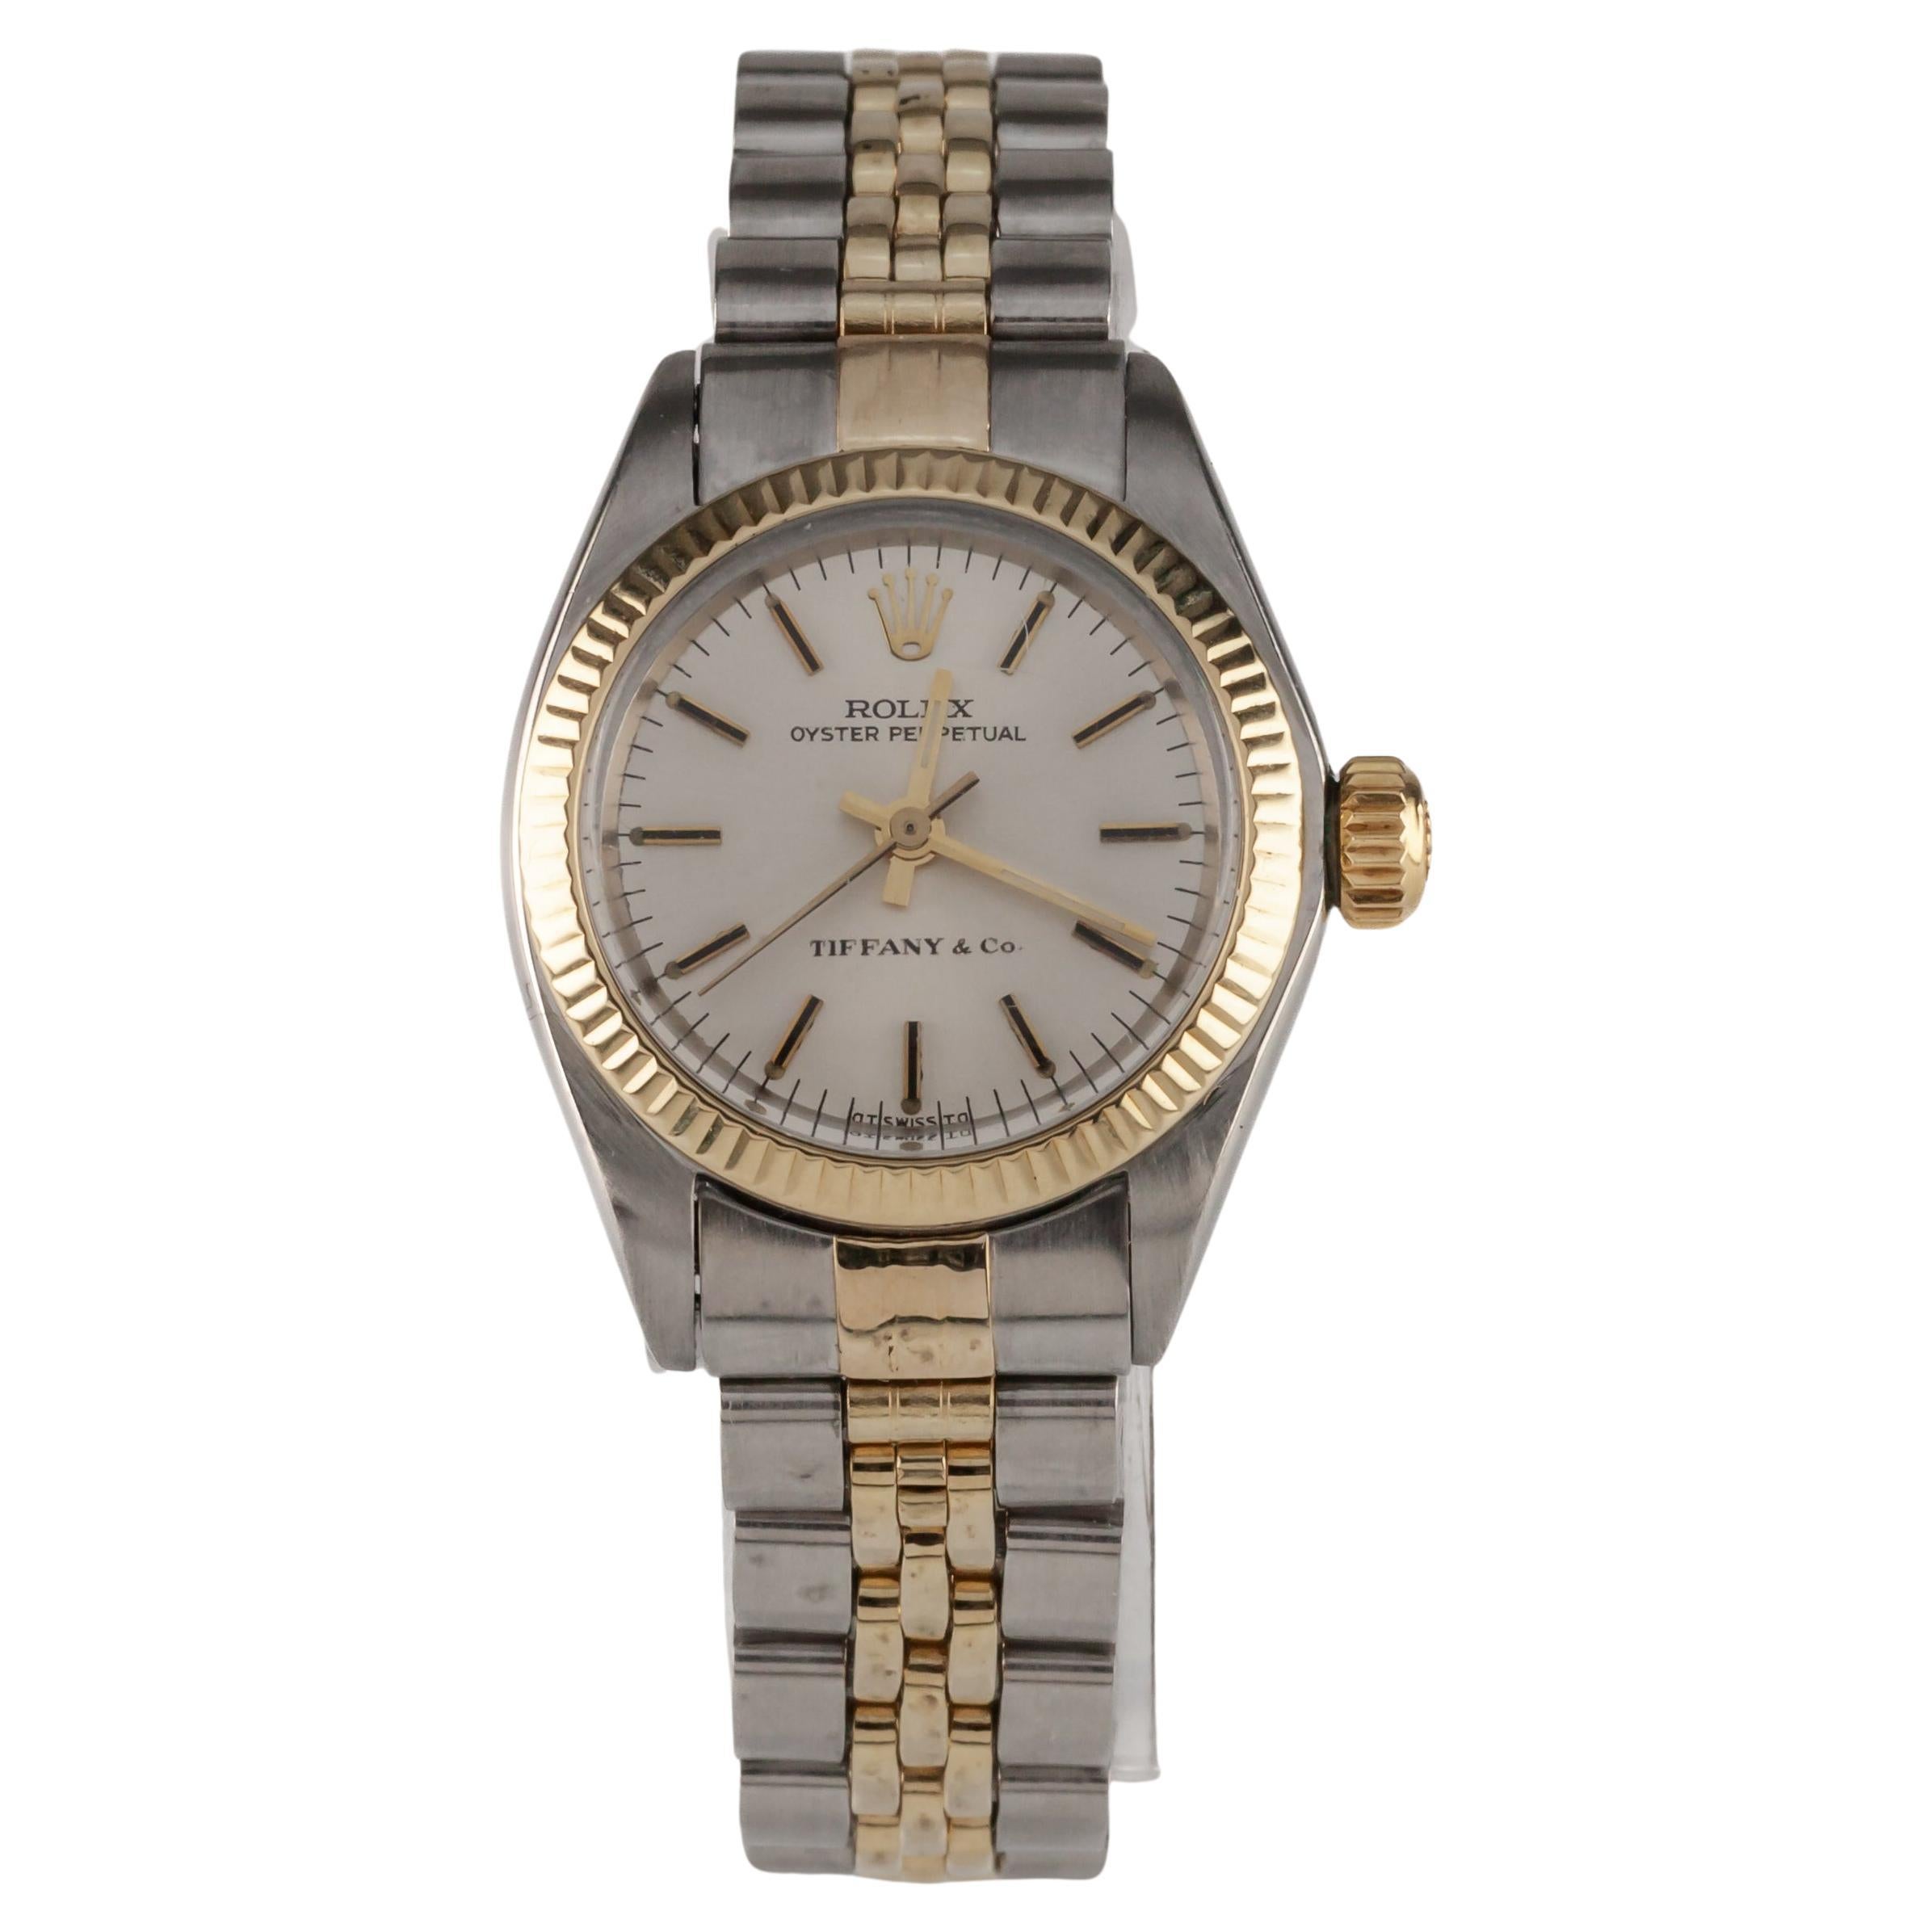 Rolex Two-Tone Stainless Steel and Gold Women's Datejust w/ Box 6917 Tiffany&Co